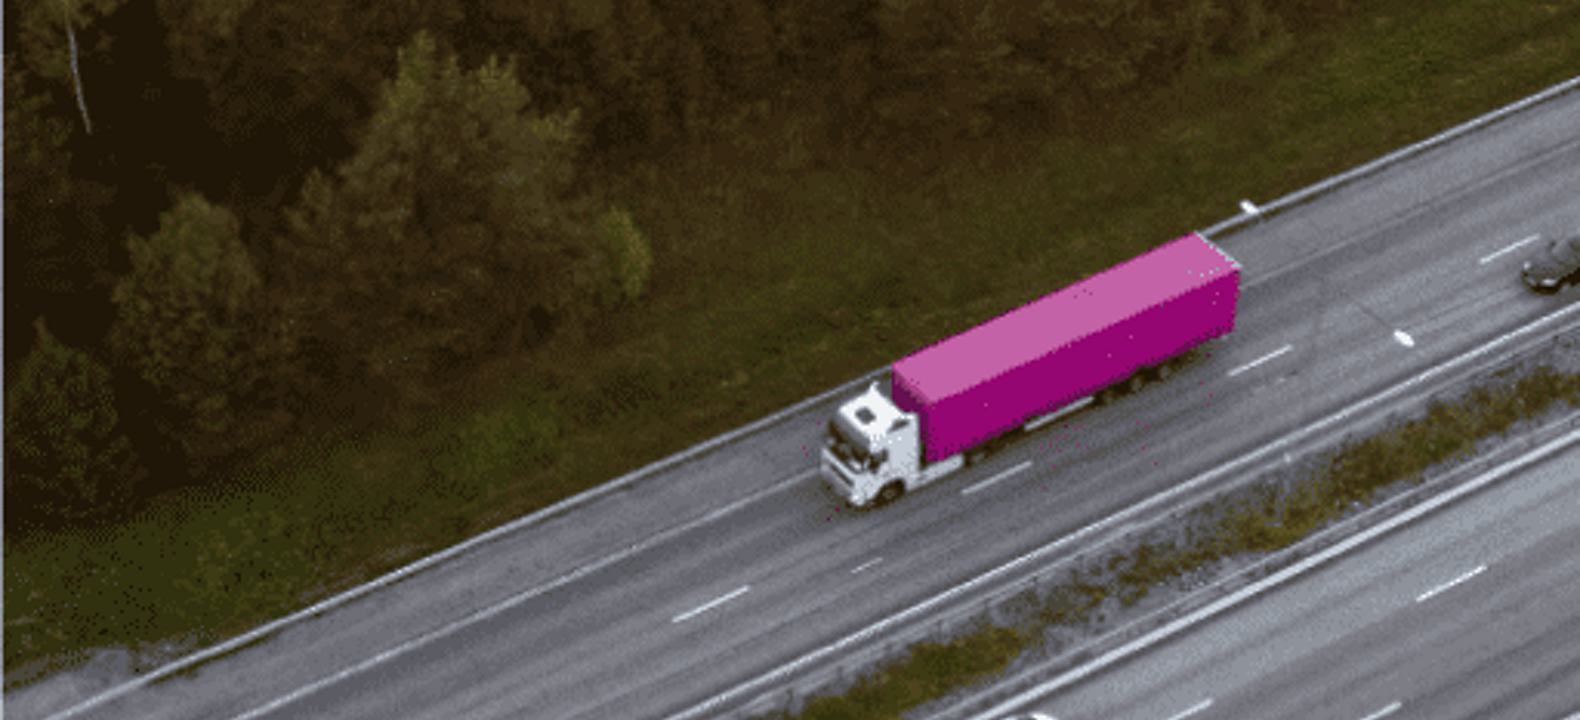 Magenta semi-truck travels on a highway.